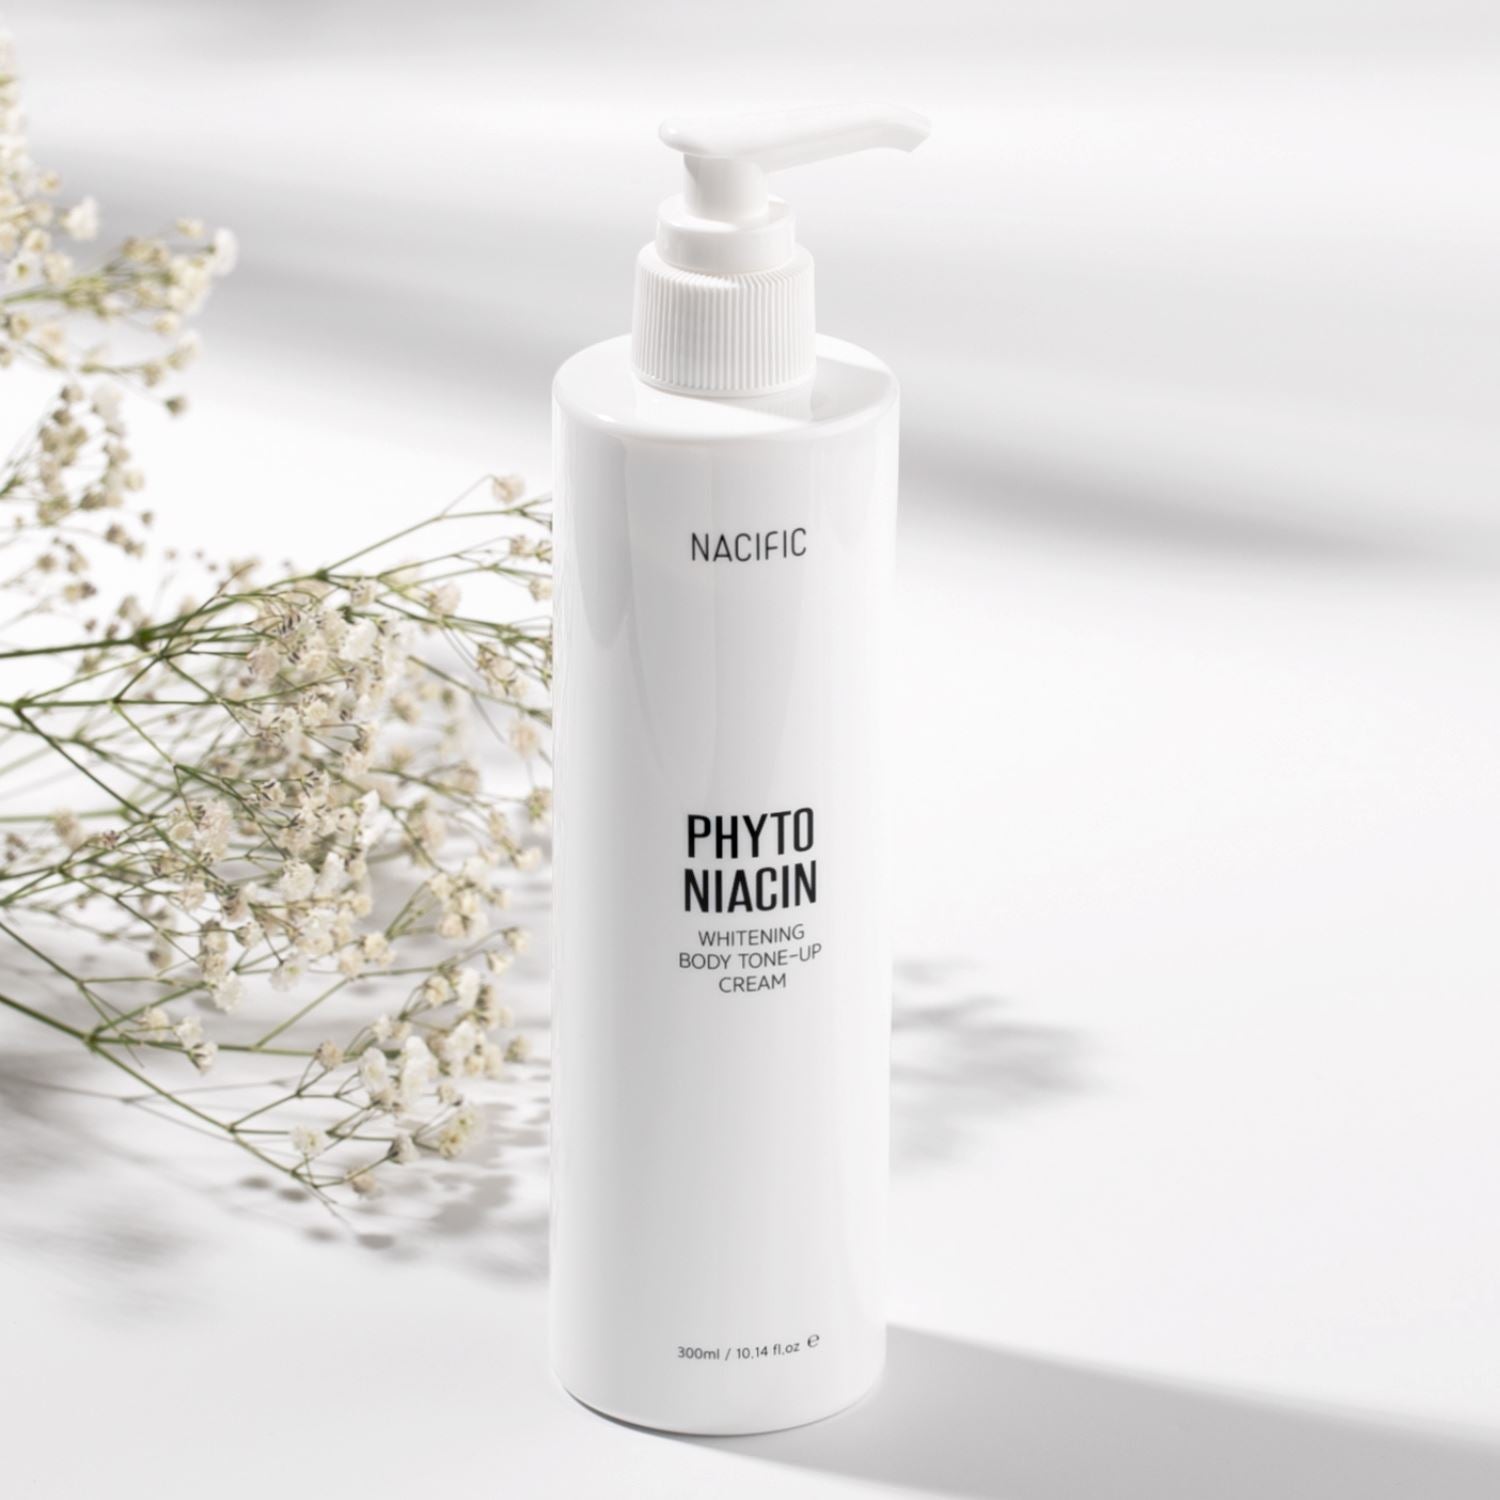 Nacific Phyto Niacin Brightening Body Tone-Up Cream 300ml, at Orion Beauty. Nacific Official Sole Authorized Retailer in Sri Lanka!